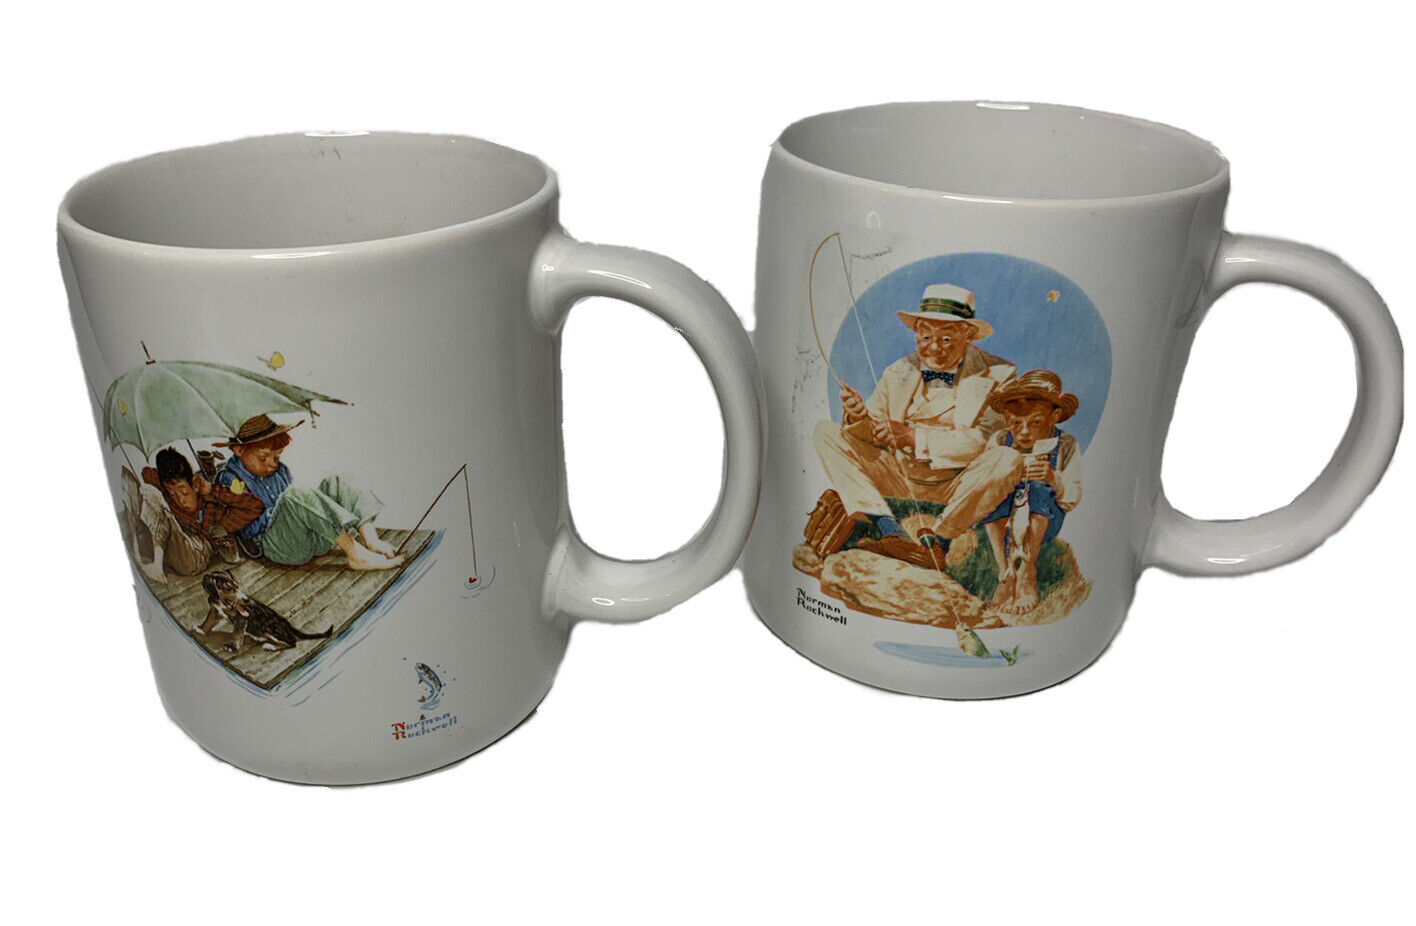 Vtg NEW Norman Rockwell Mugs 1987 Museum Collection Fishing Theme Lot of 2